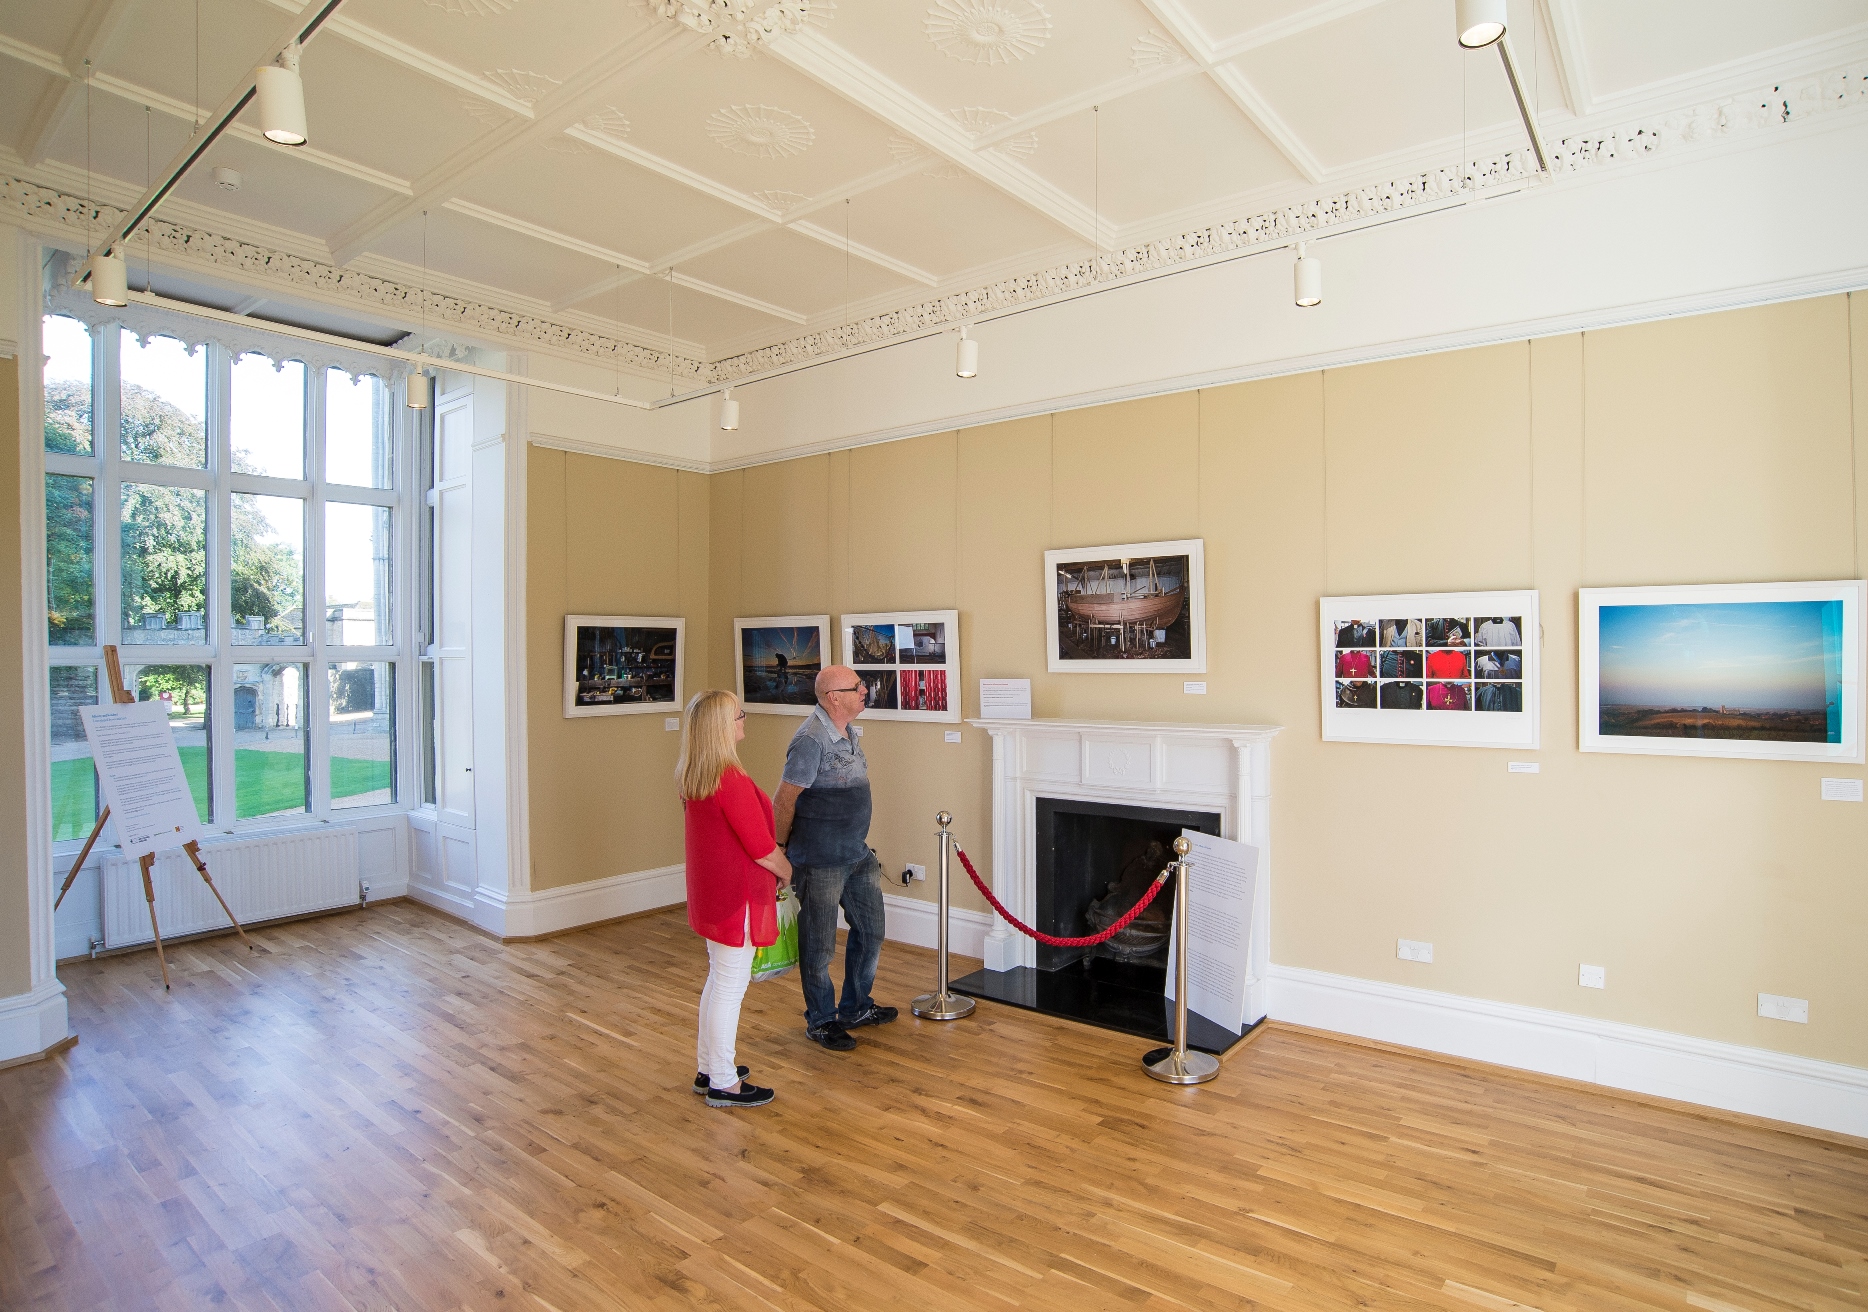 The Exhibition Room at 25 Minster Precincts, Peterborough